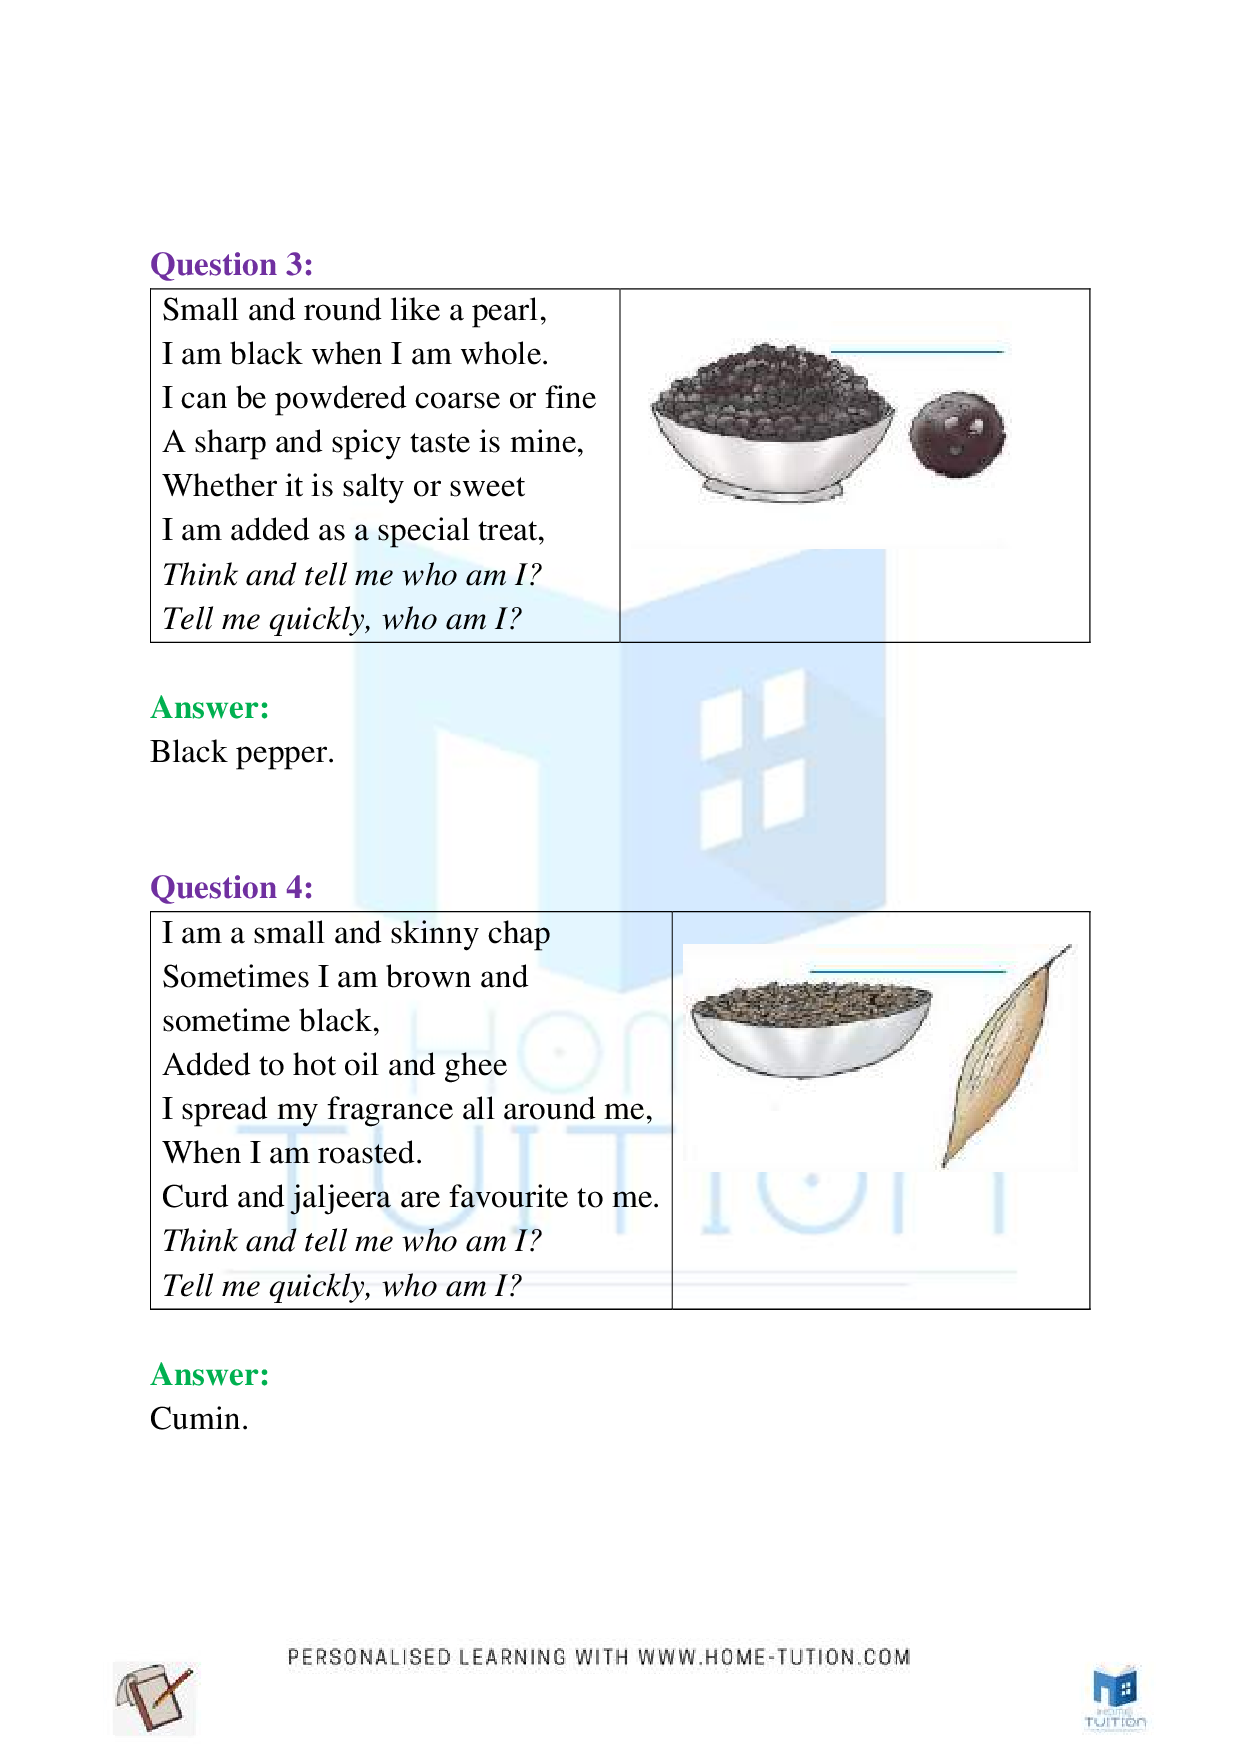 NCERT Class 4 EVS Chapter-25 Spicy Riddles